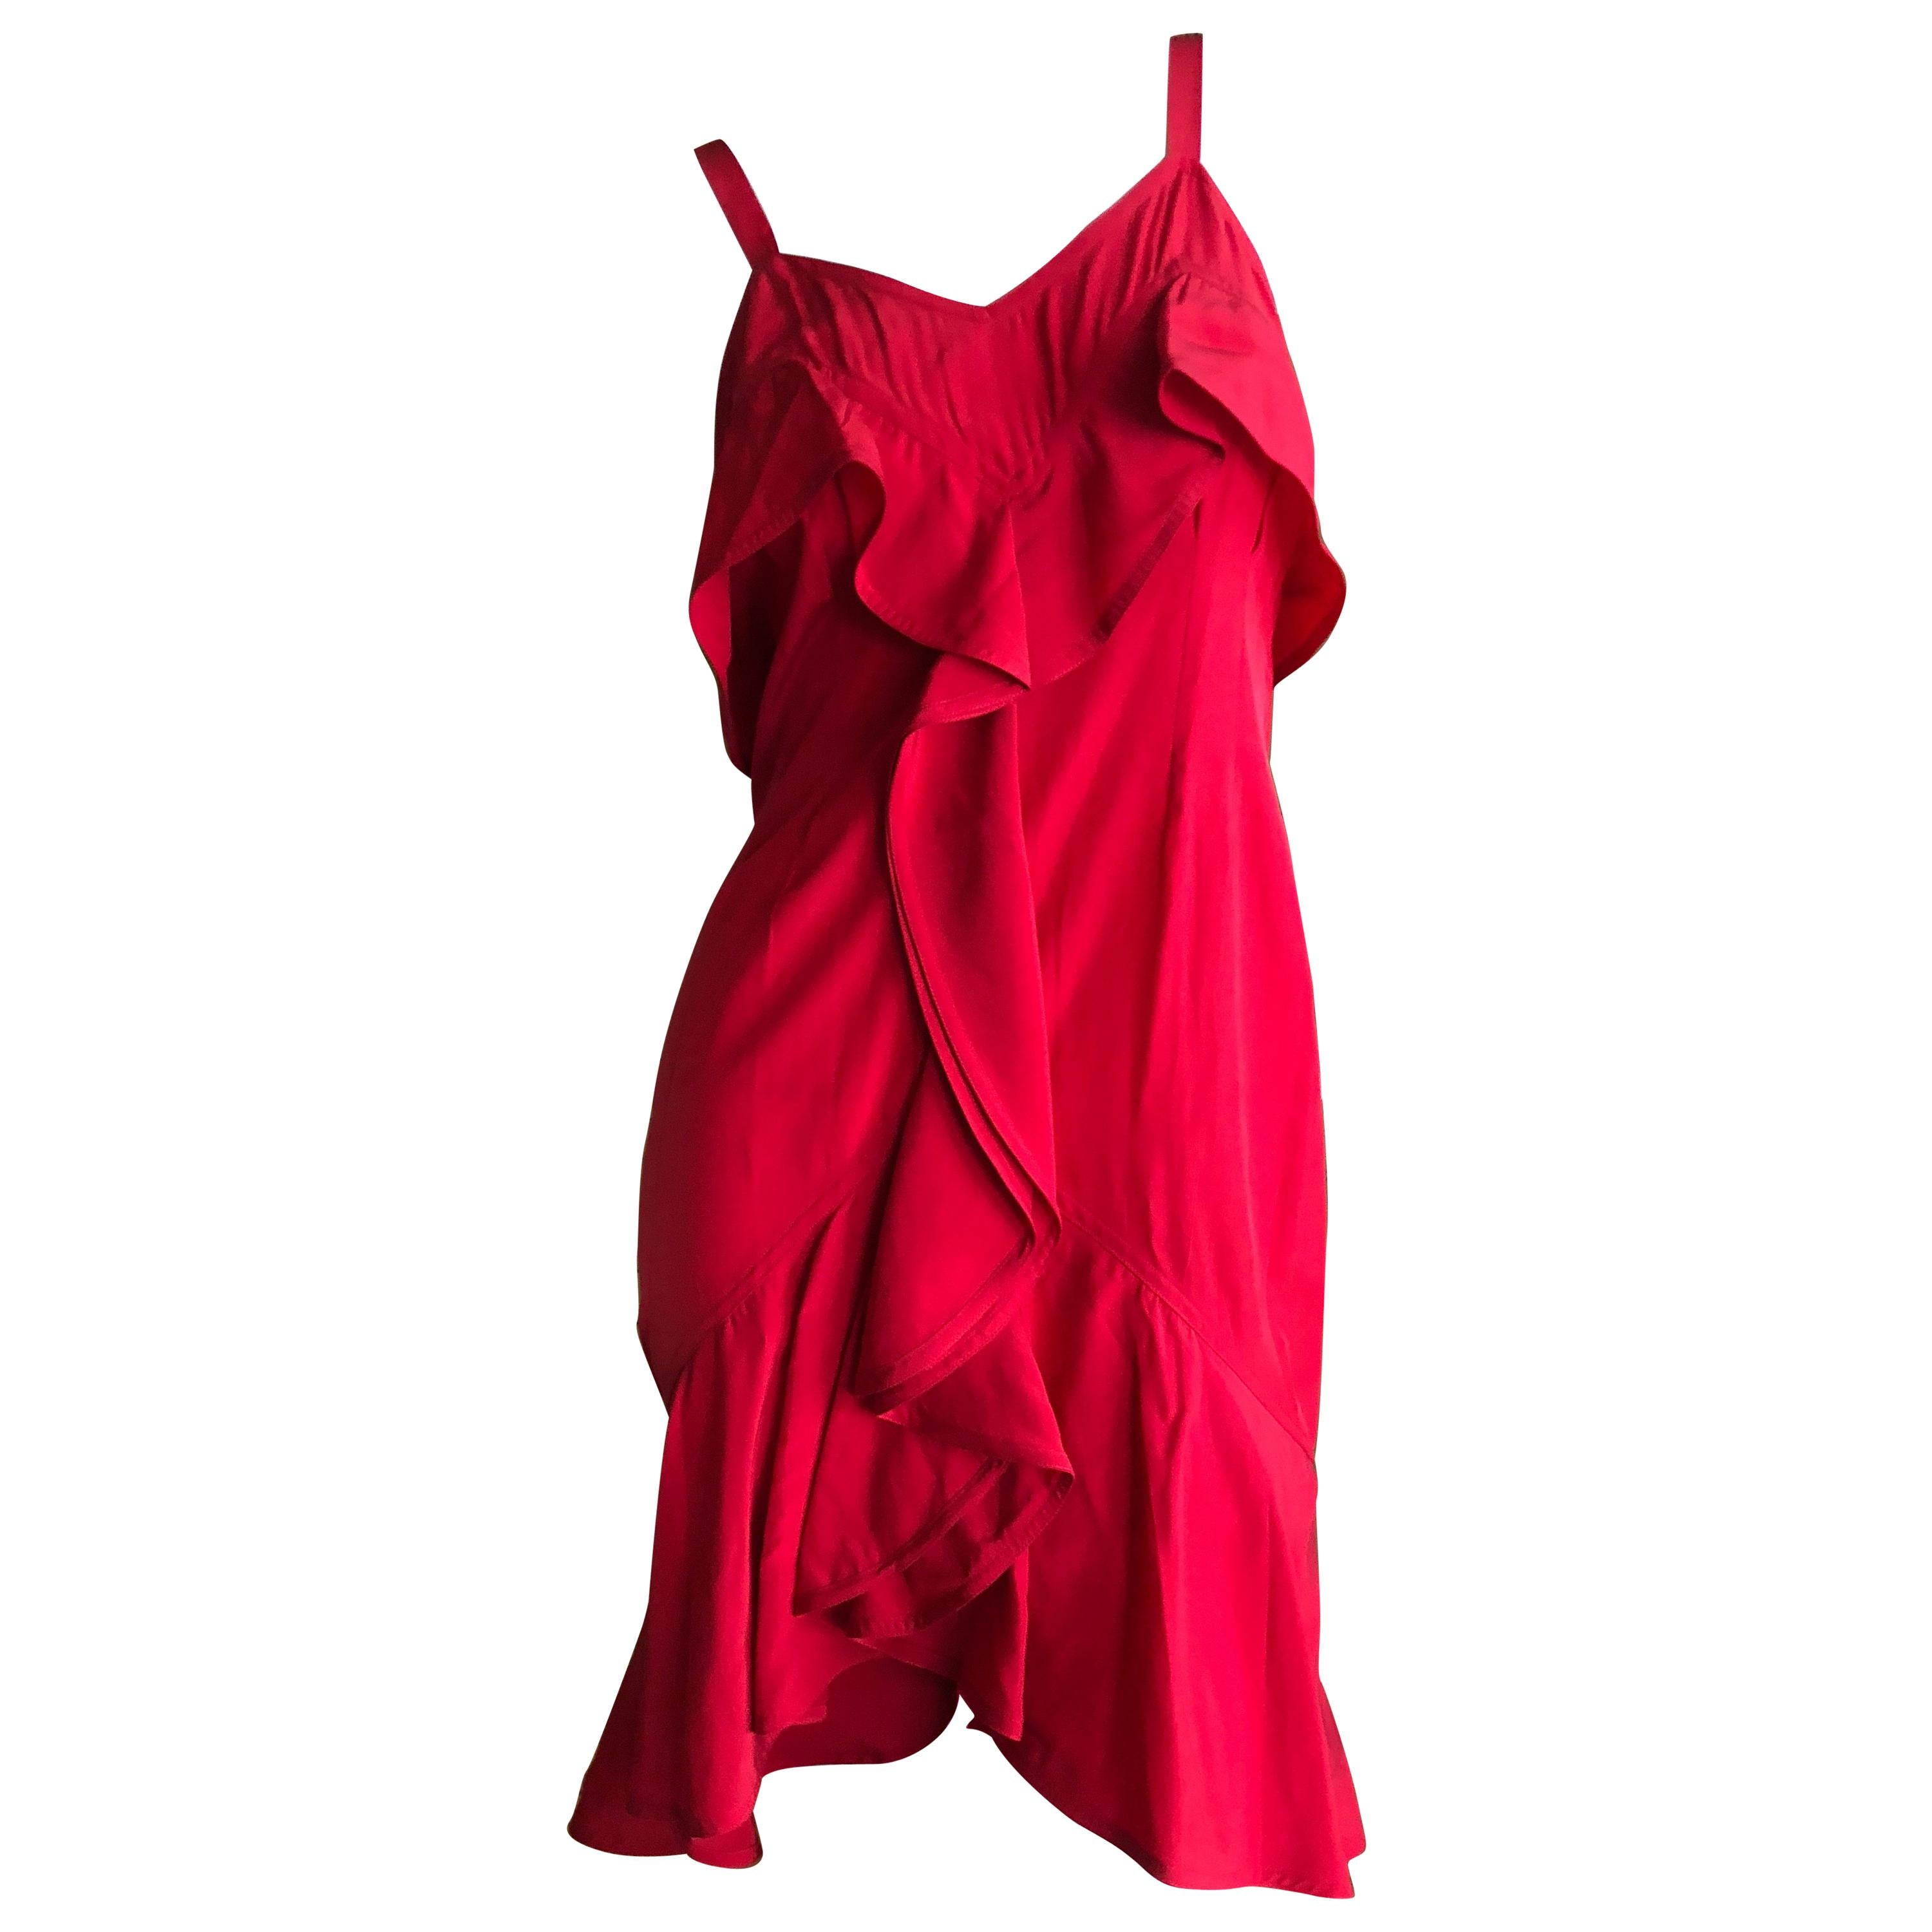 Yves Saint Laurent Tom Ford Fall 2003 Look 1 Red Ruffle Dress For Sale